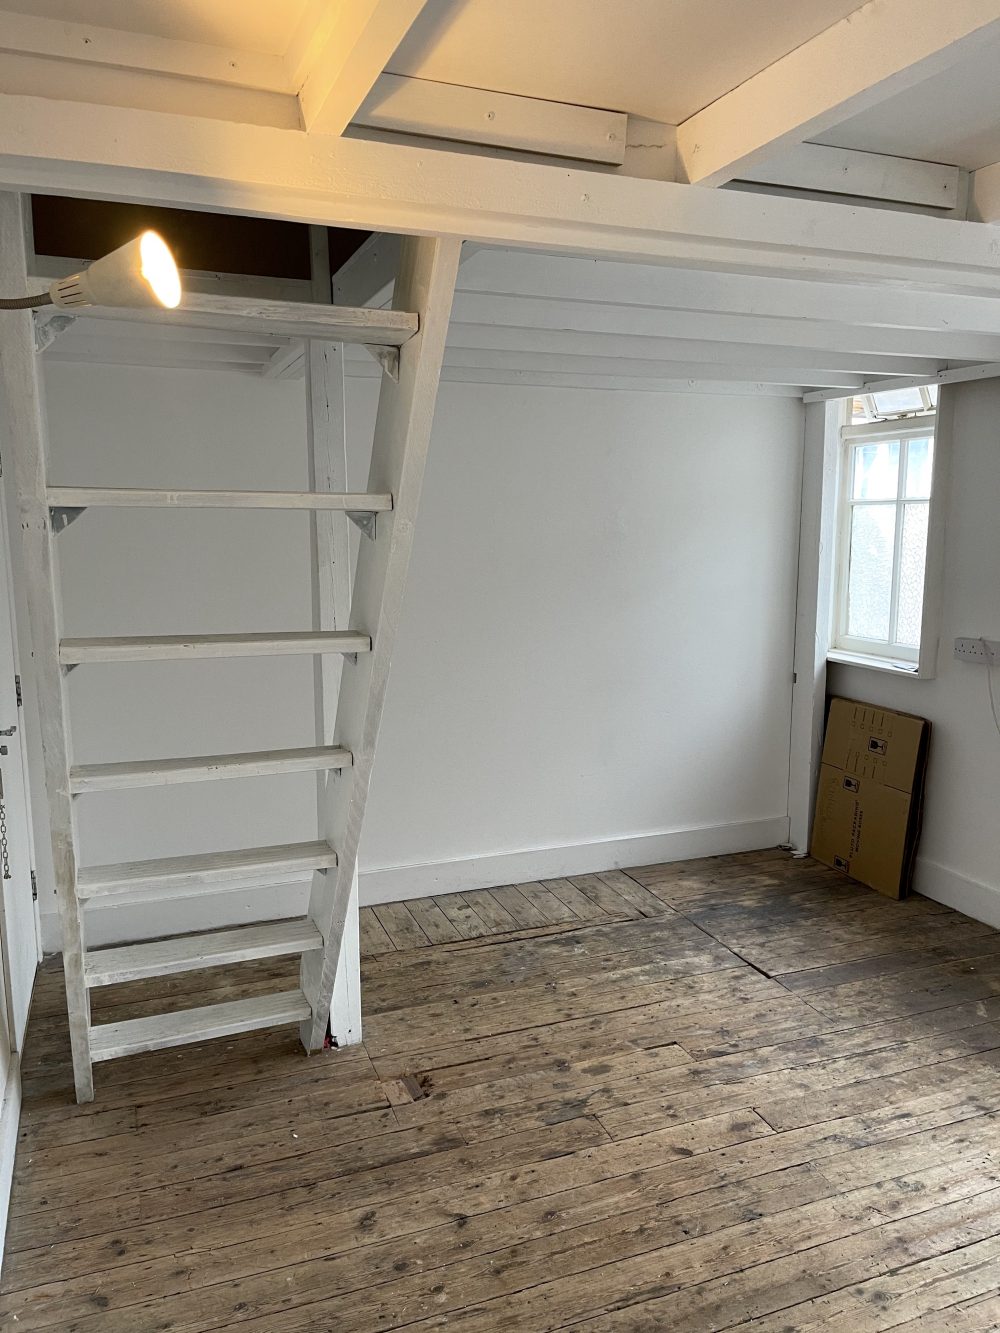 Mezzanine Studio Available to rent in N16 Shelford Place Pic5